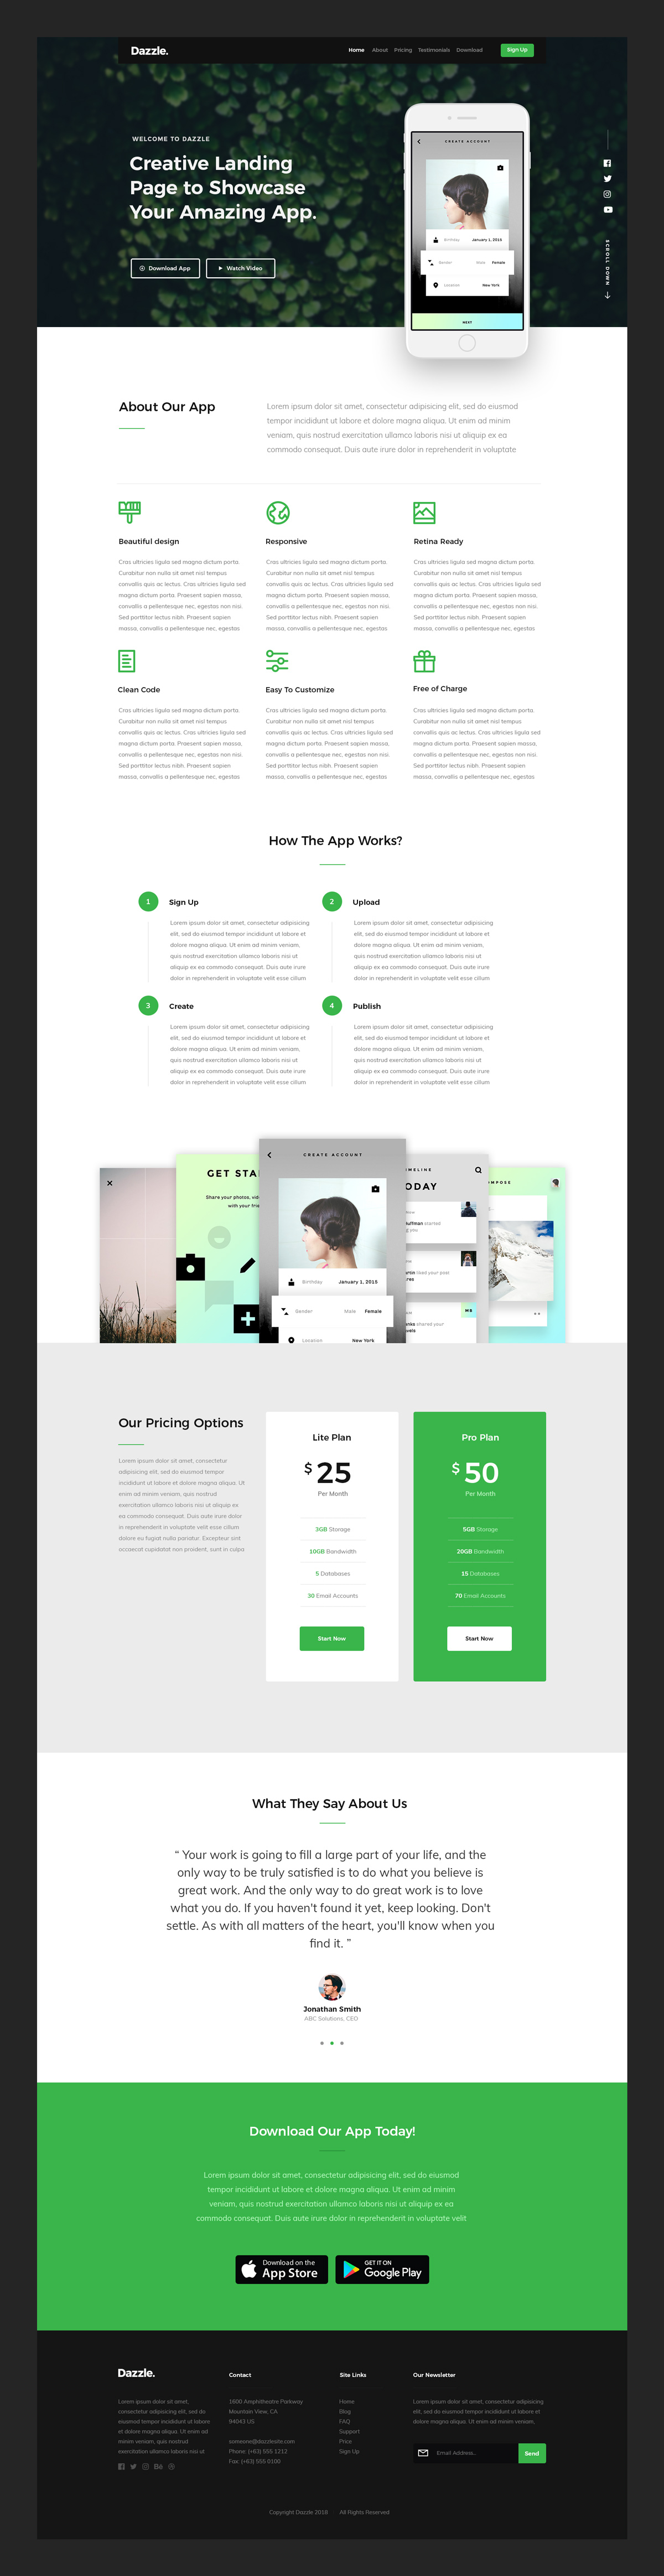 Dazzle - App Landing Page Free PSD Template 02